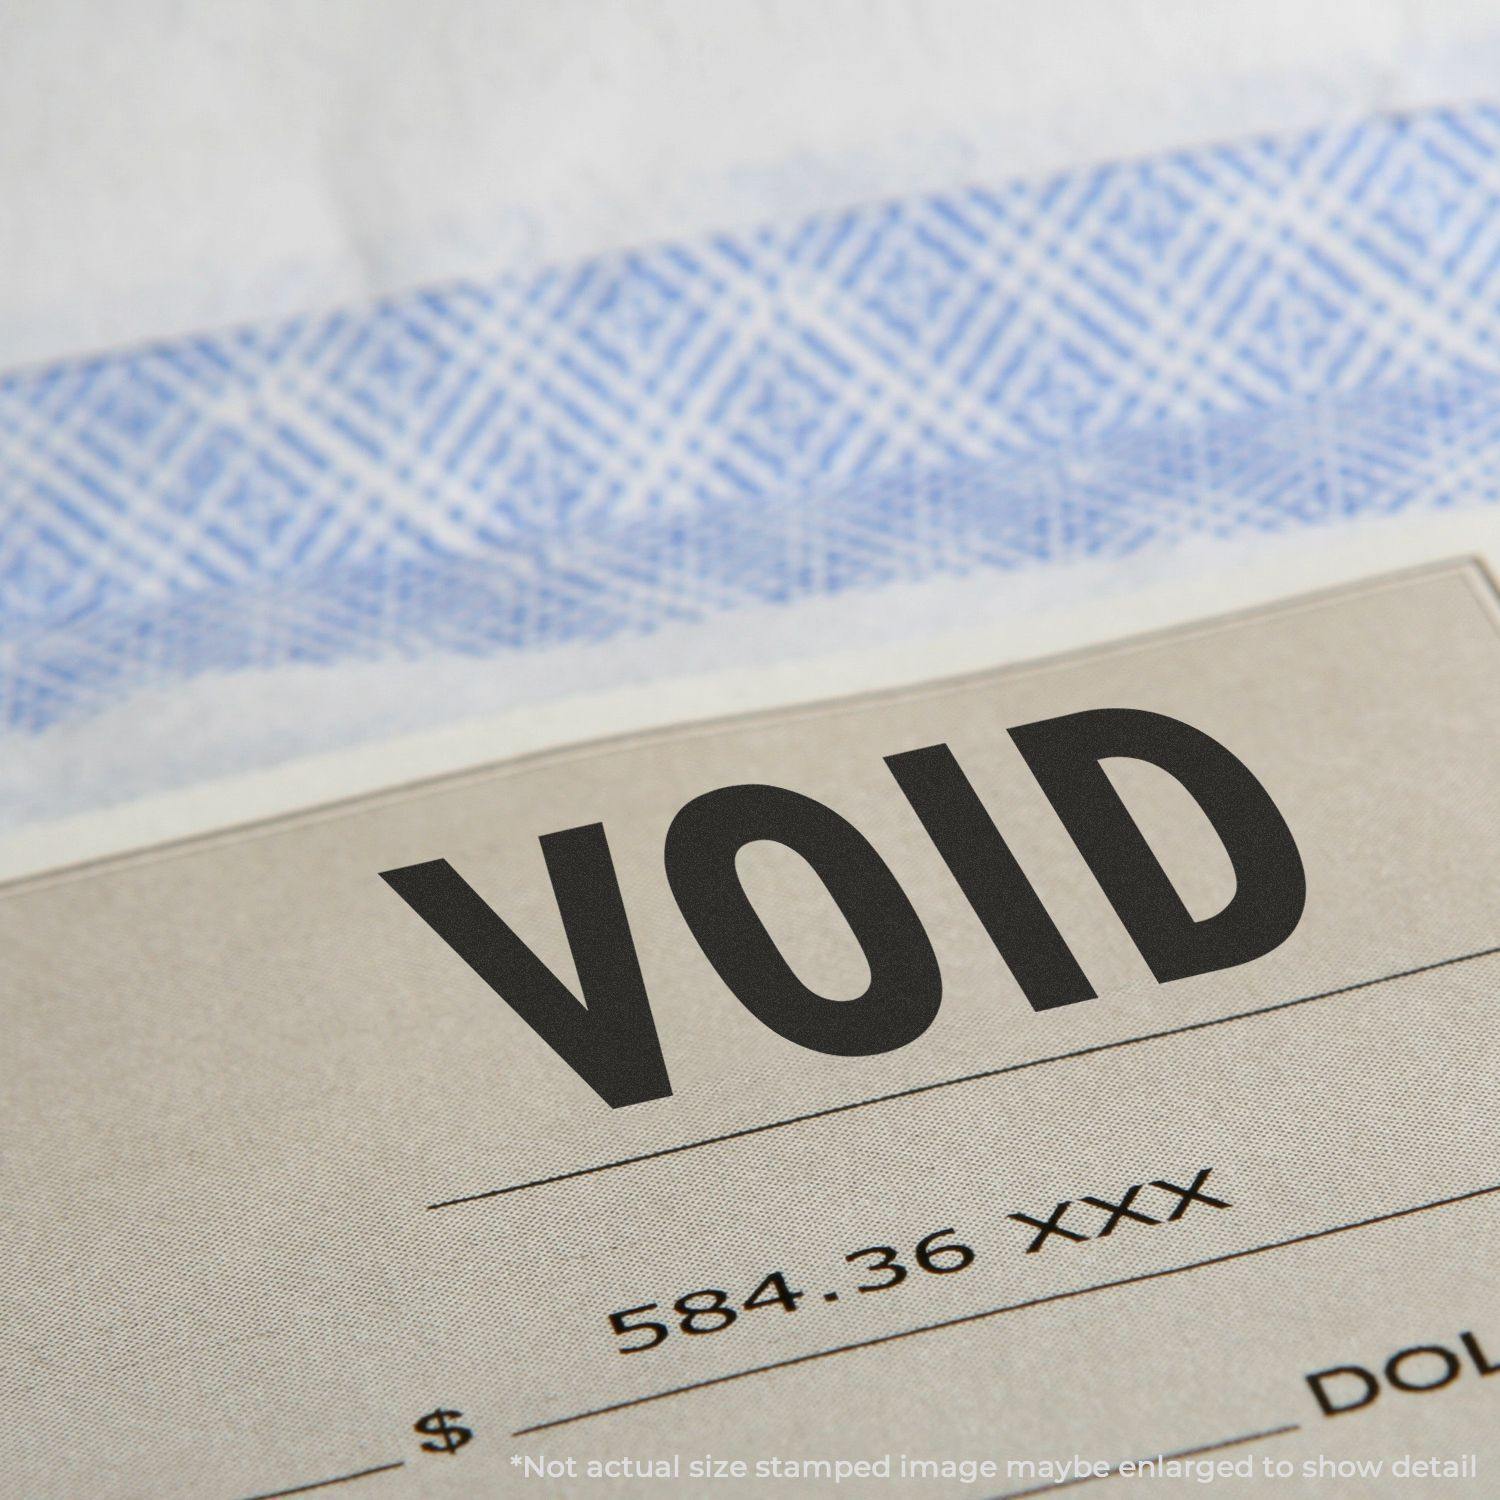 A stock office pre-inked stamp with a stamped image showing how the text "VOID" in a large font is displayed after stamping.